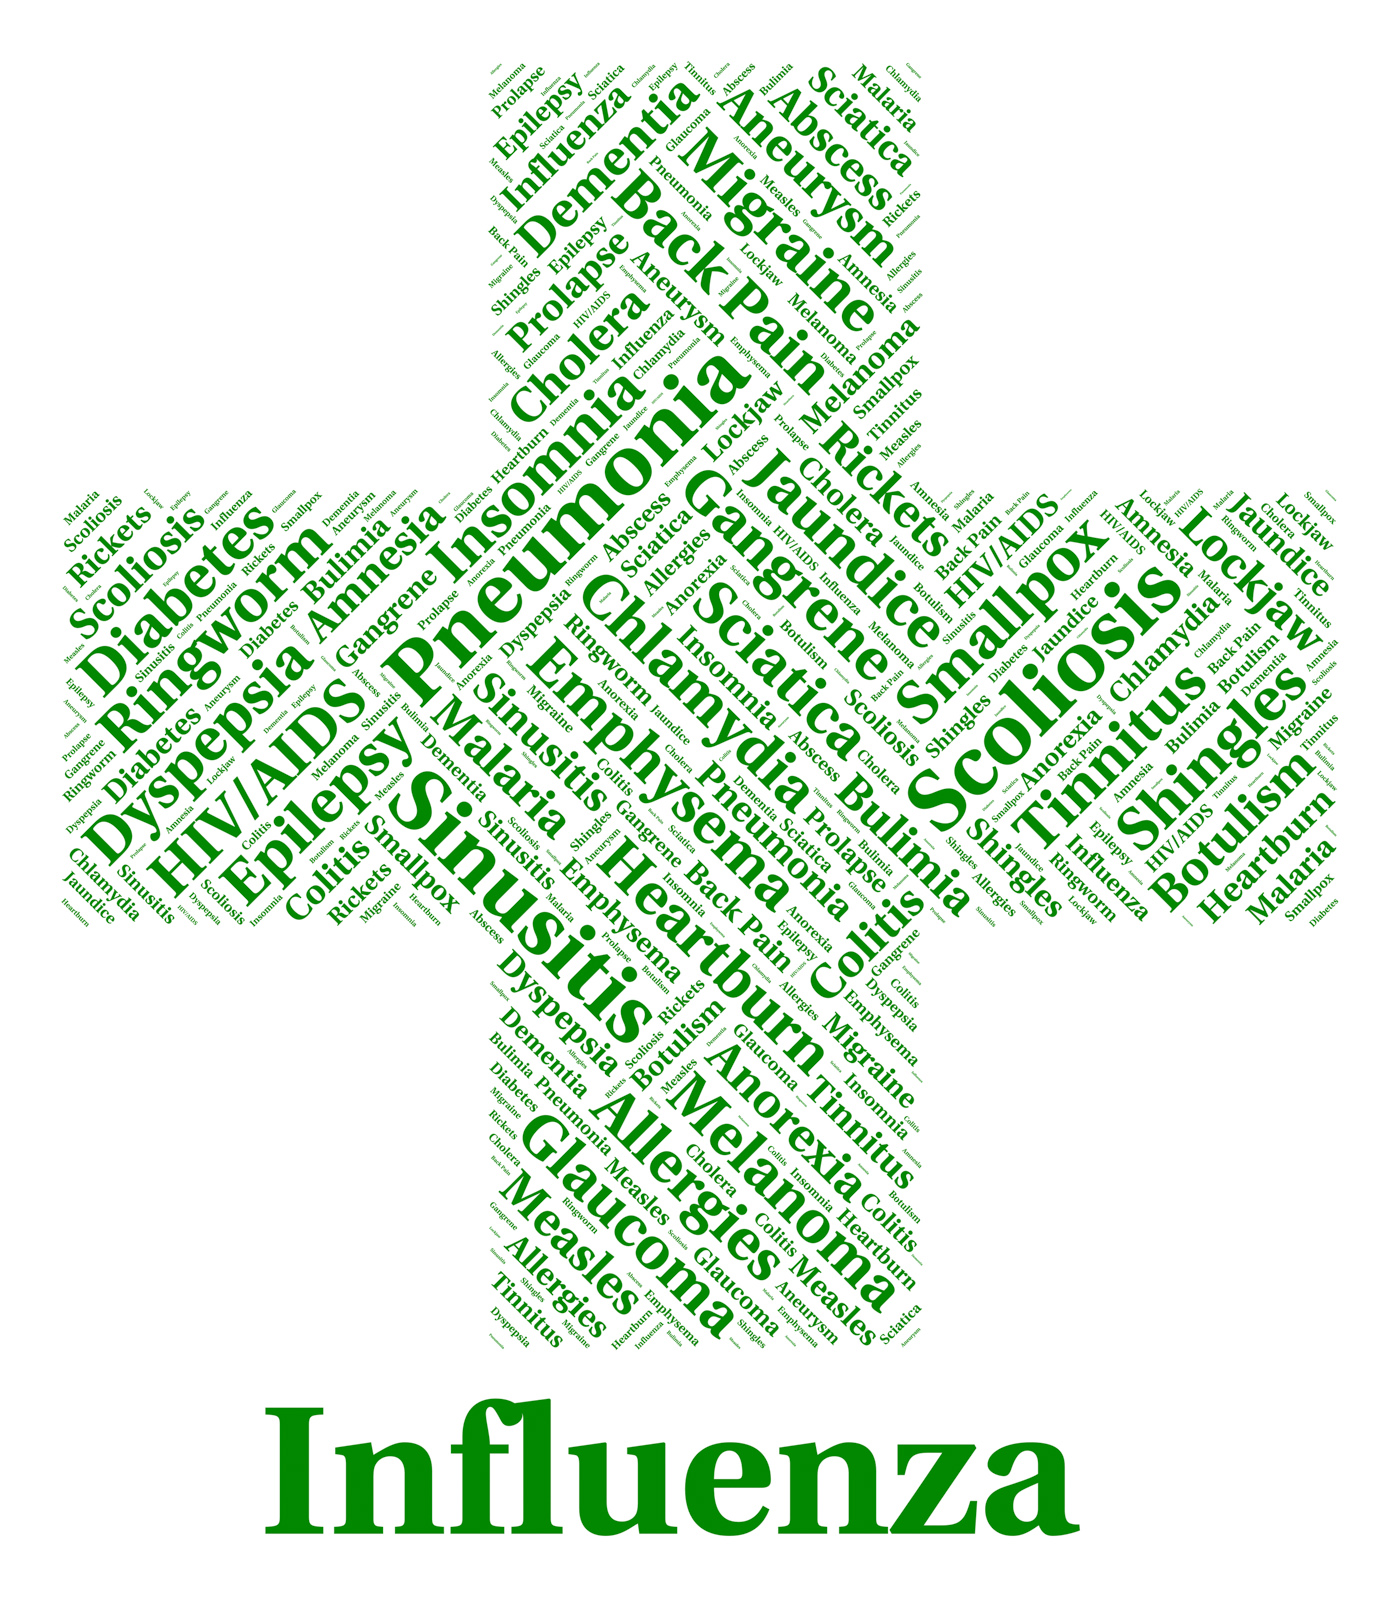 Influenza Sickness Means Poor Health And Afflictions, Affliction, Illness, Sickness, Sick, HQ Photo